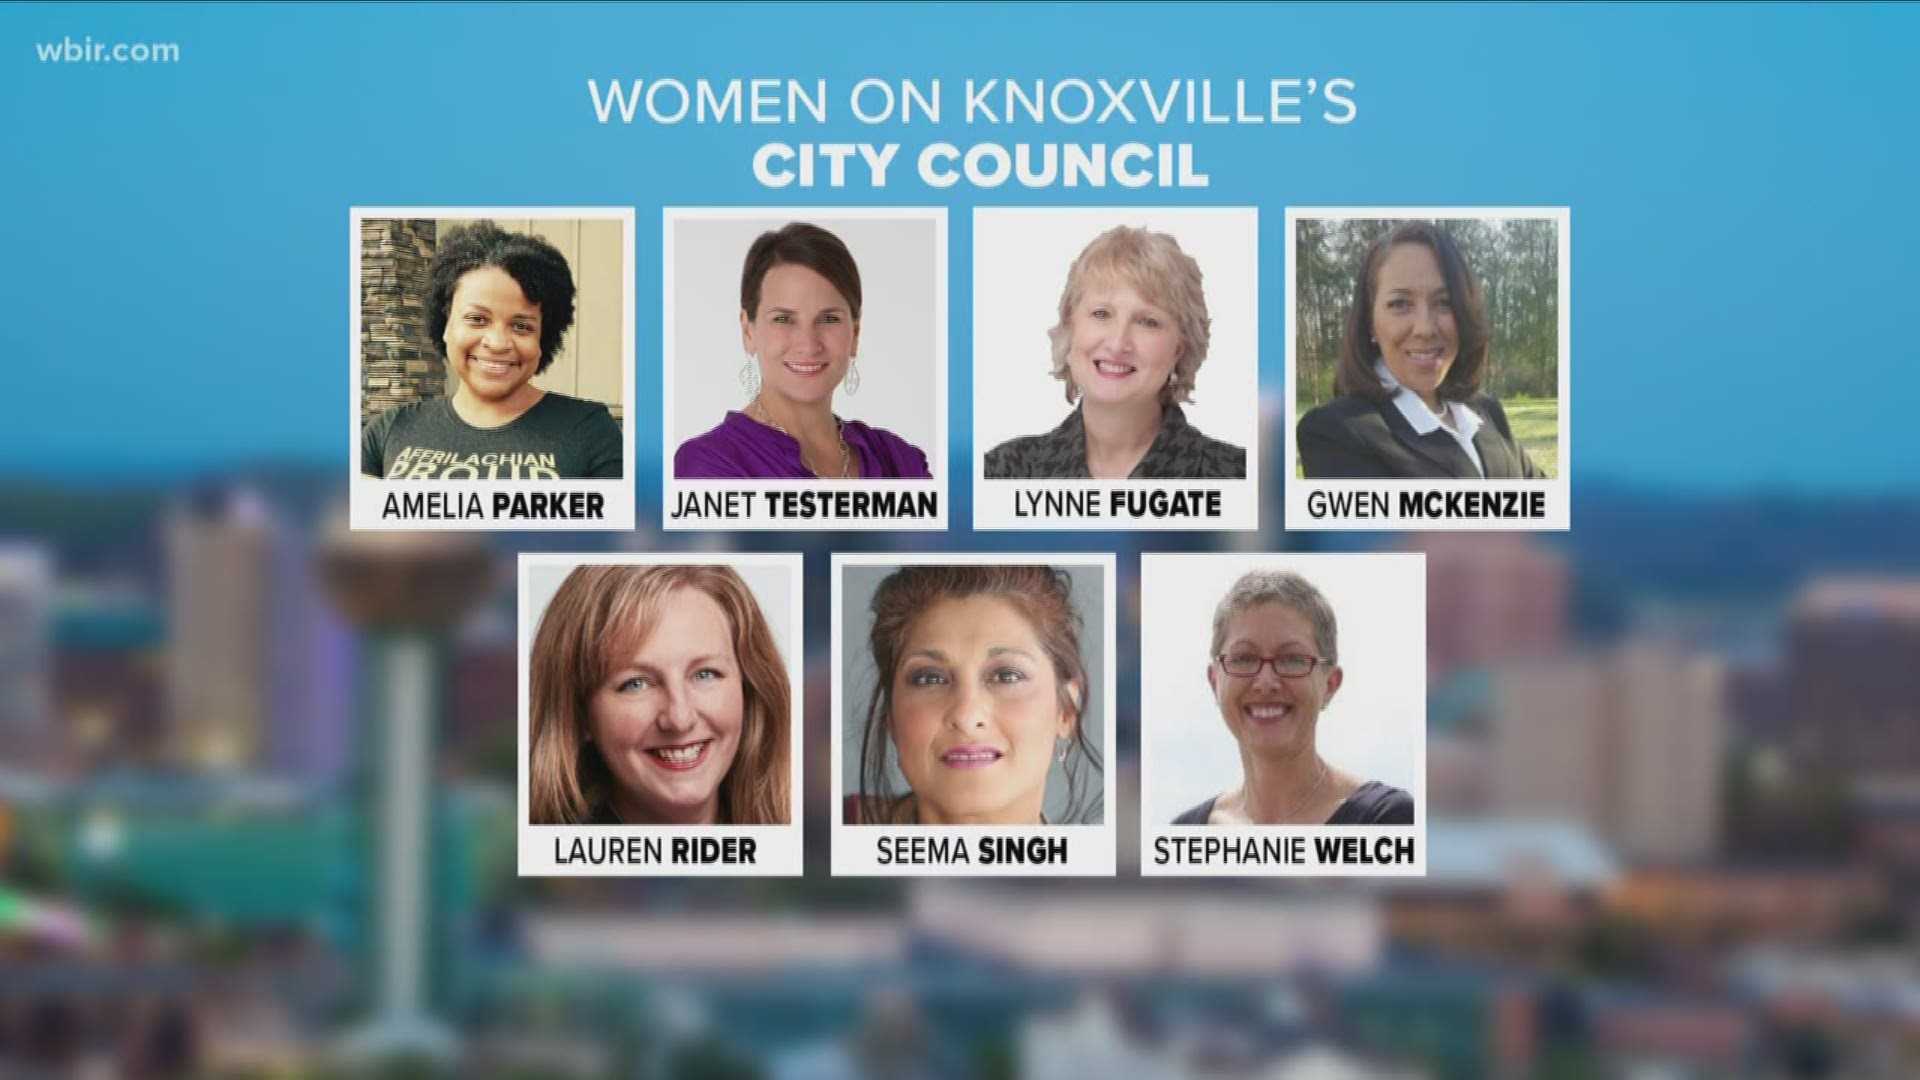 As of Thursday night, seven women will hold positions on the city council in January.